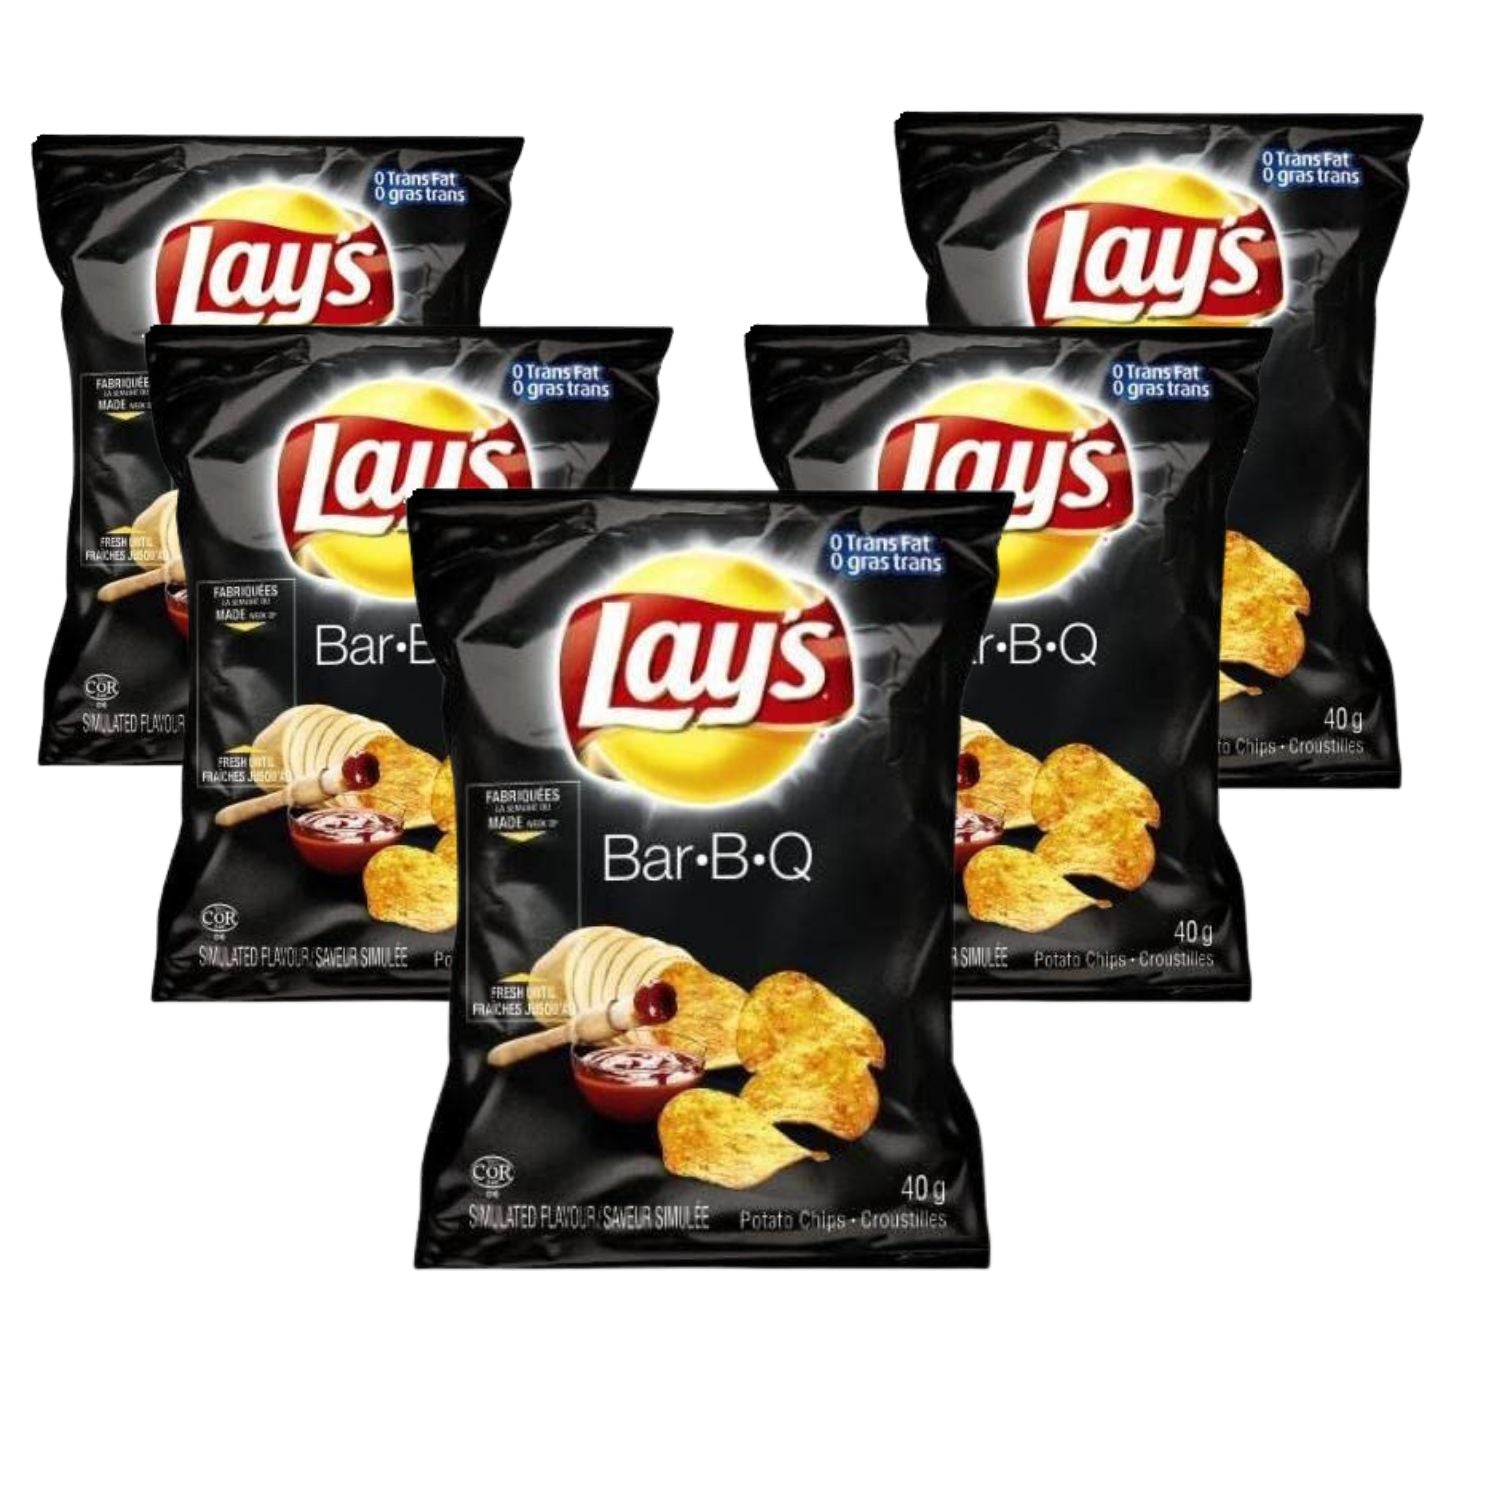 Lays Barbecue Potato Chips Snack Bag pack of 5